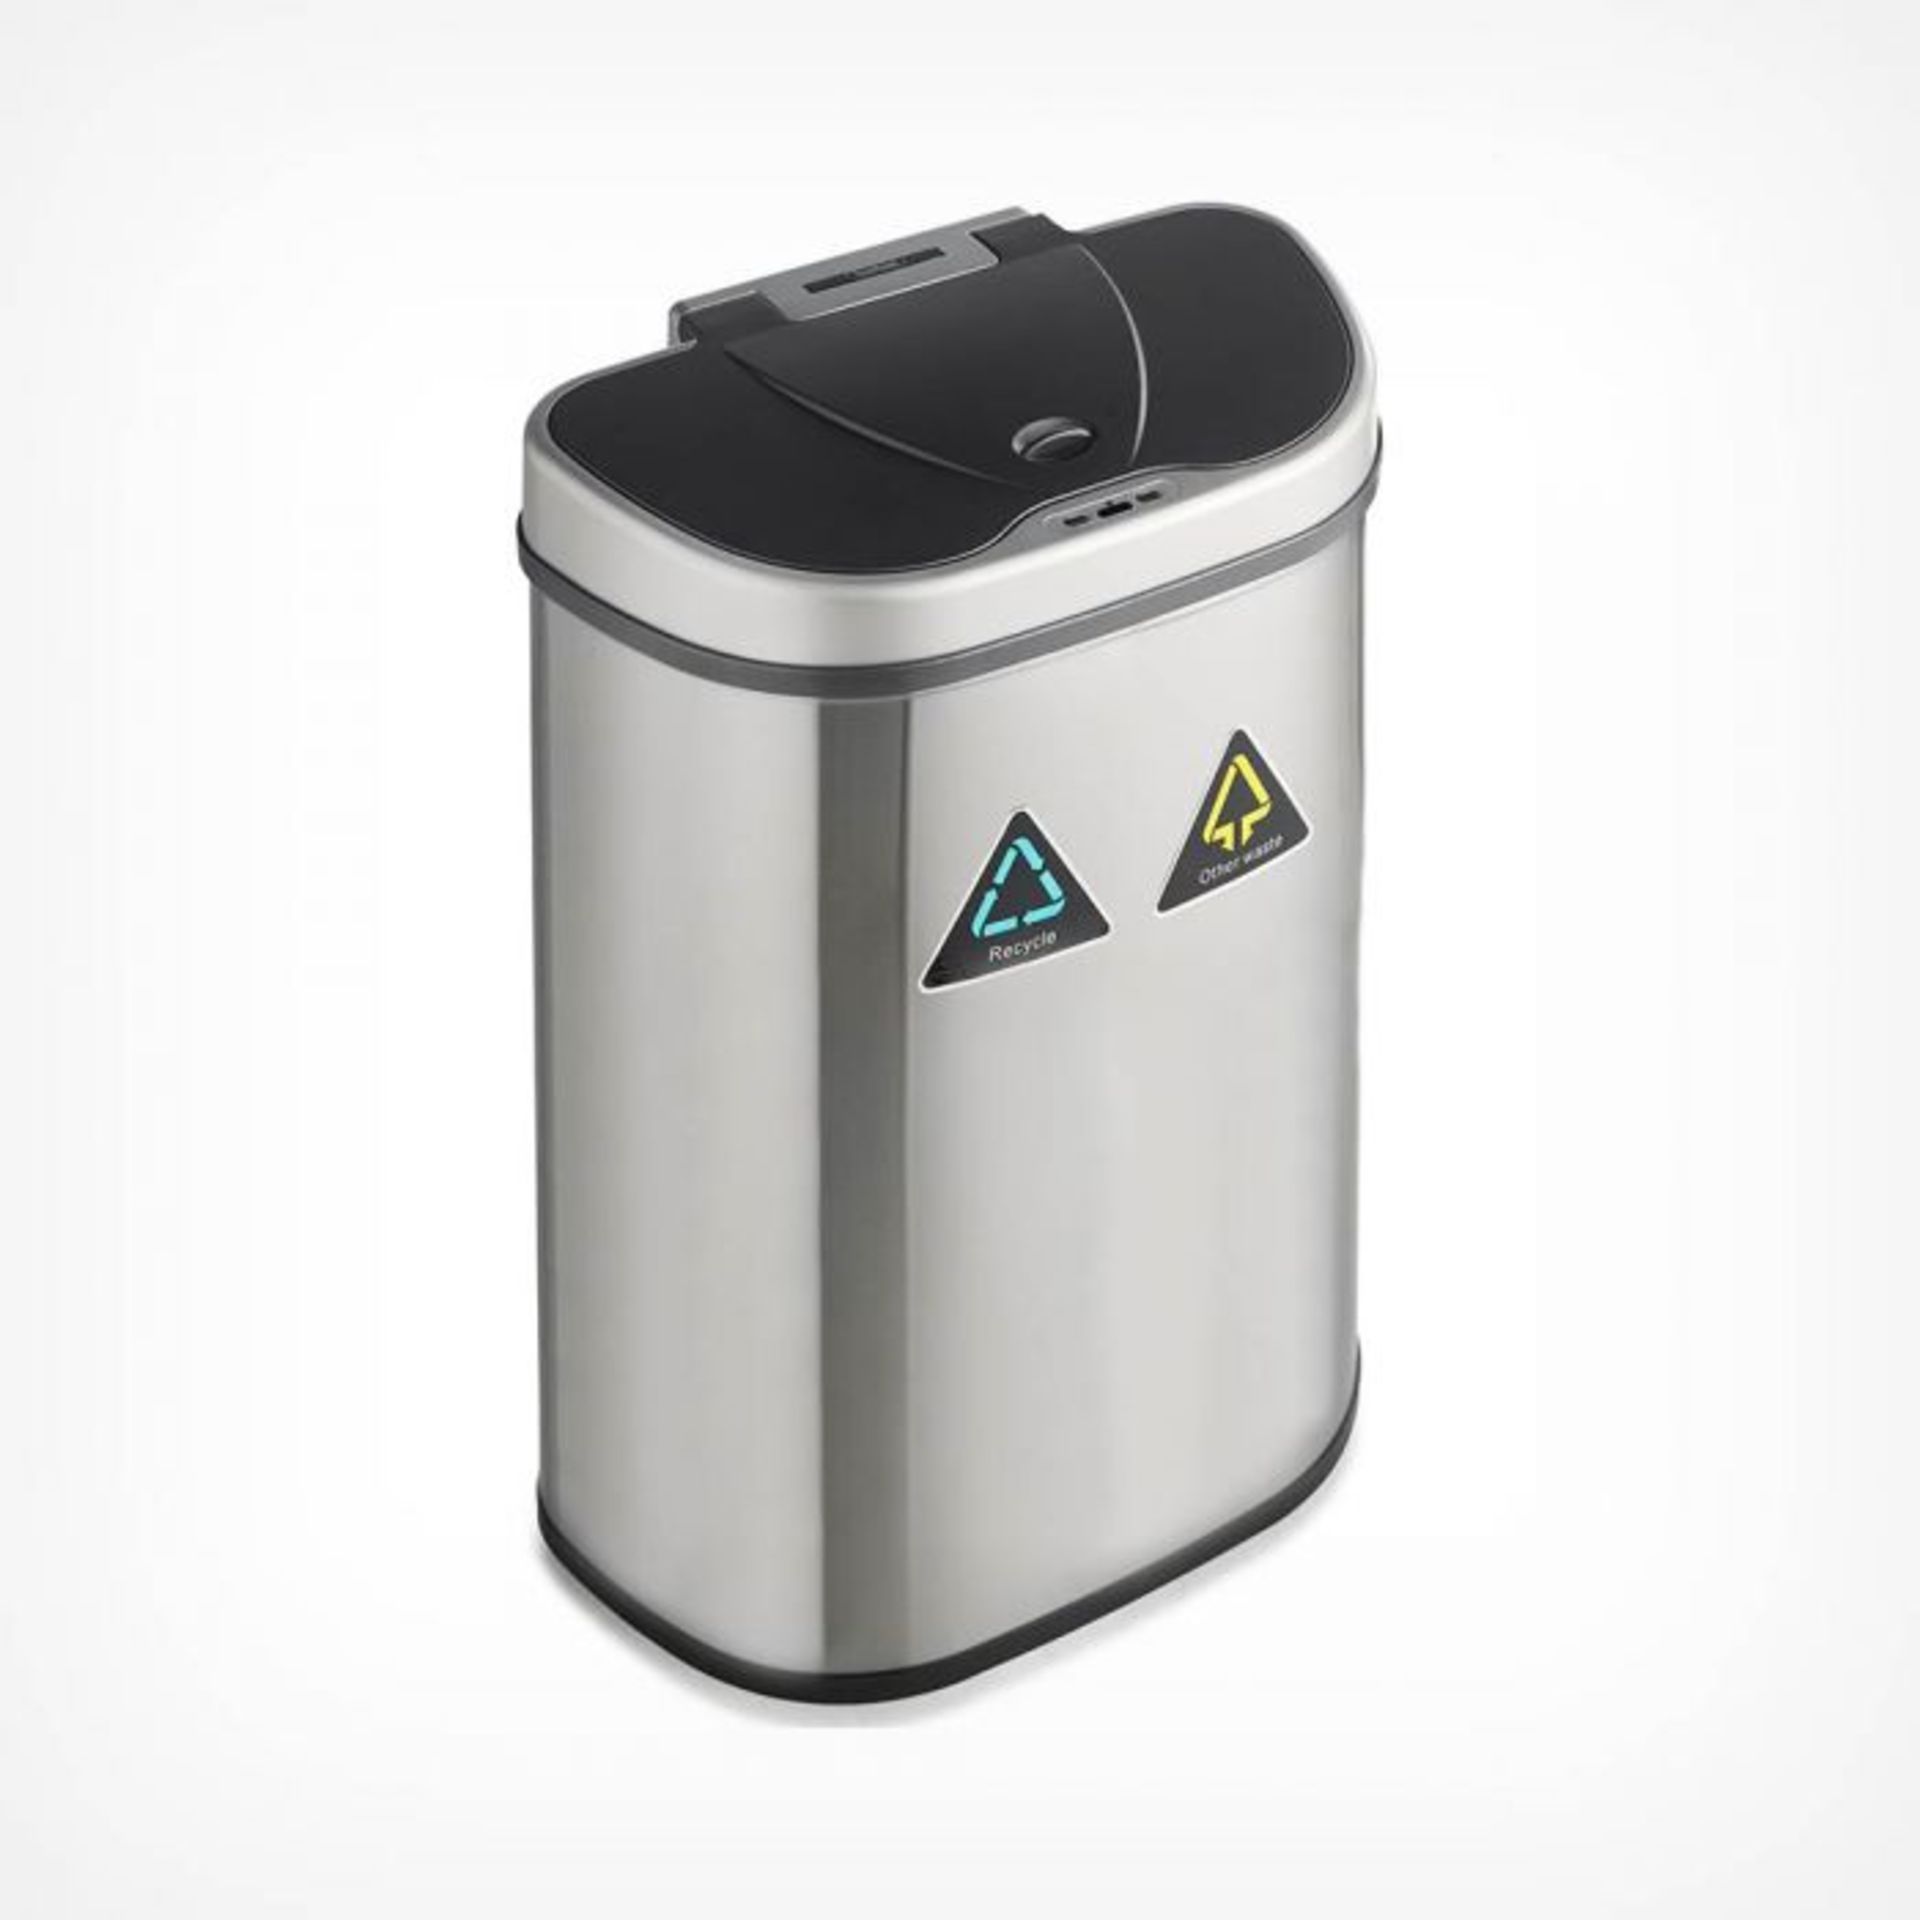 (V75) 70L Recycling Sensor Bin Advanced, hygienic and practical! LED Infrared Sensor opens the... - Image 2 of 4